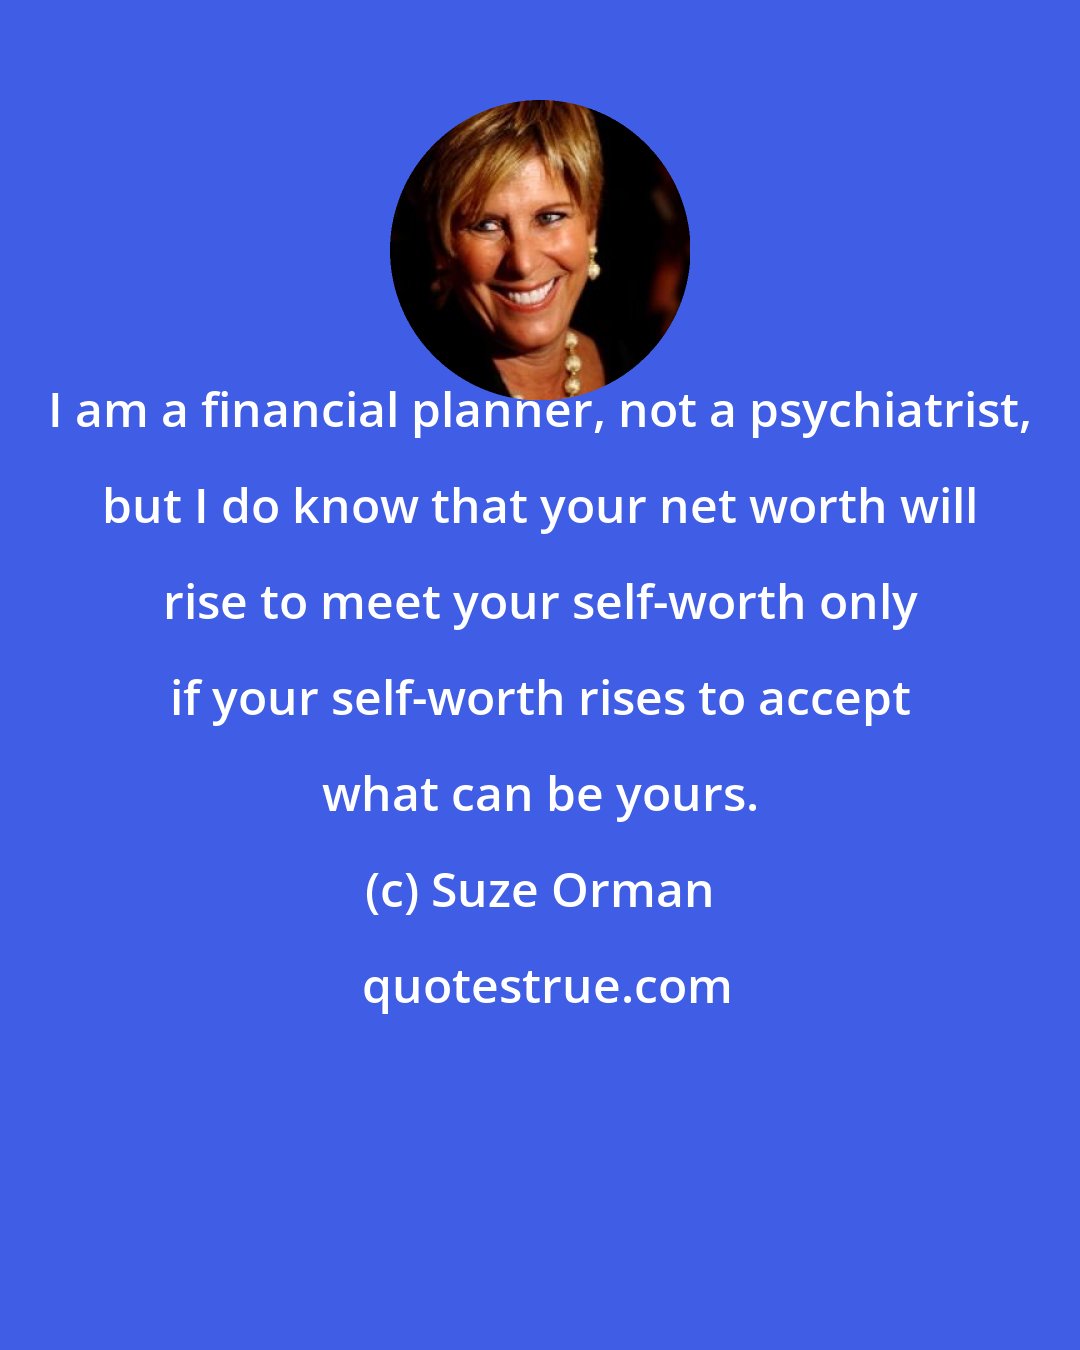 Suze Orman: I am a financial planner, not a psychiatrist, but I do know that your net worth will rise to meet your self-worth only if your self-worth rises to accept what can be yours.